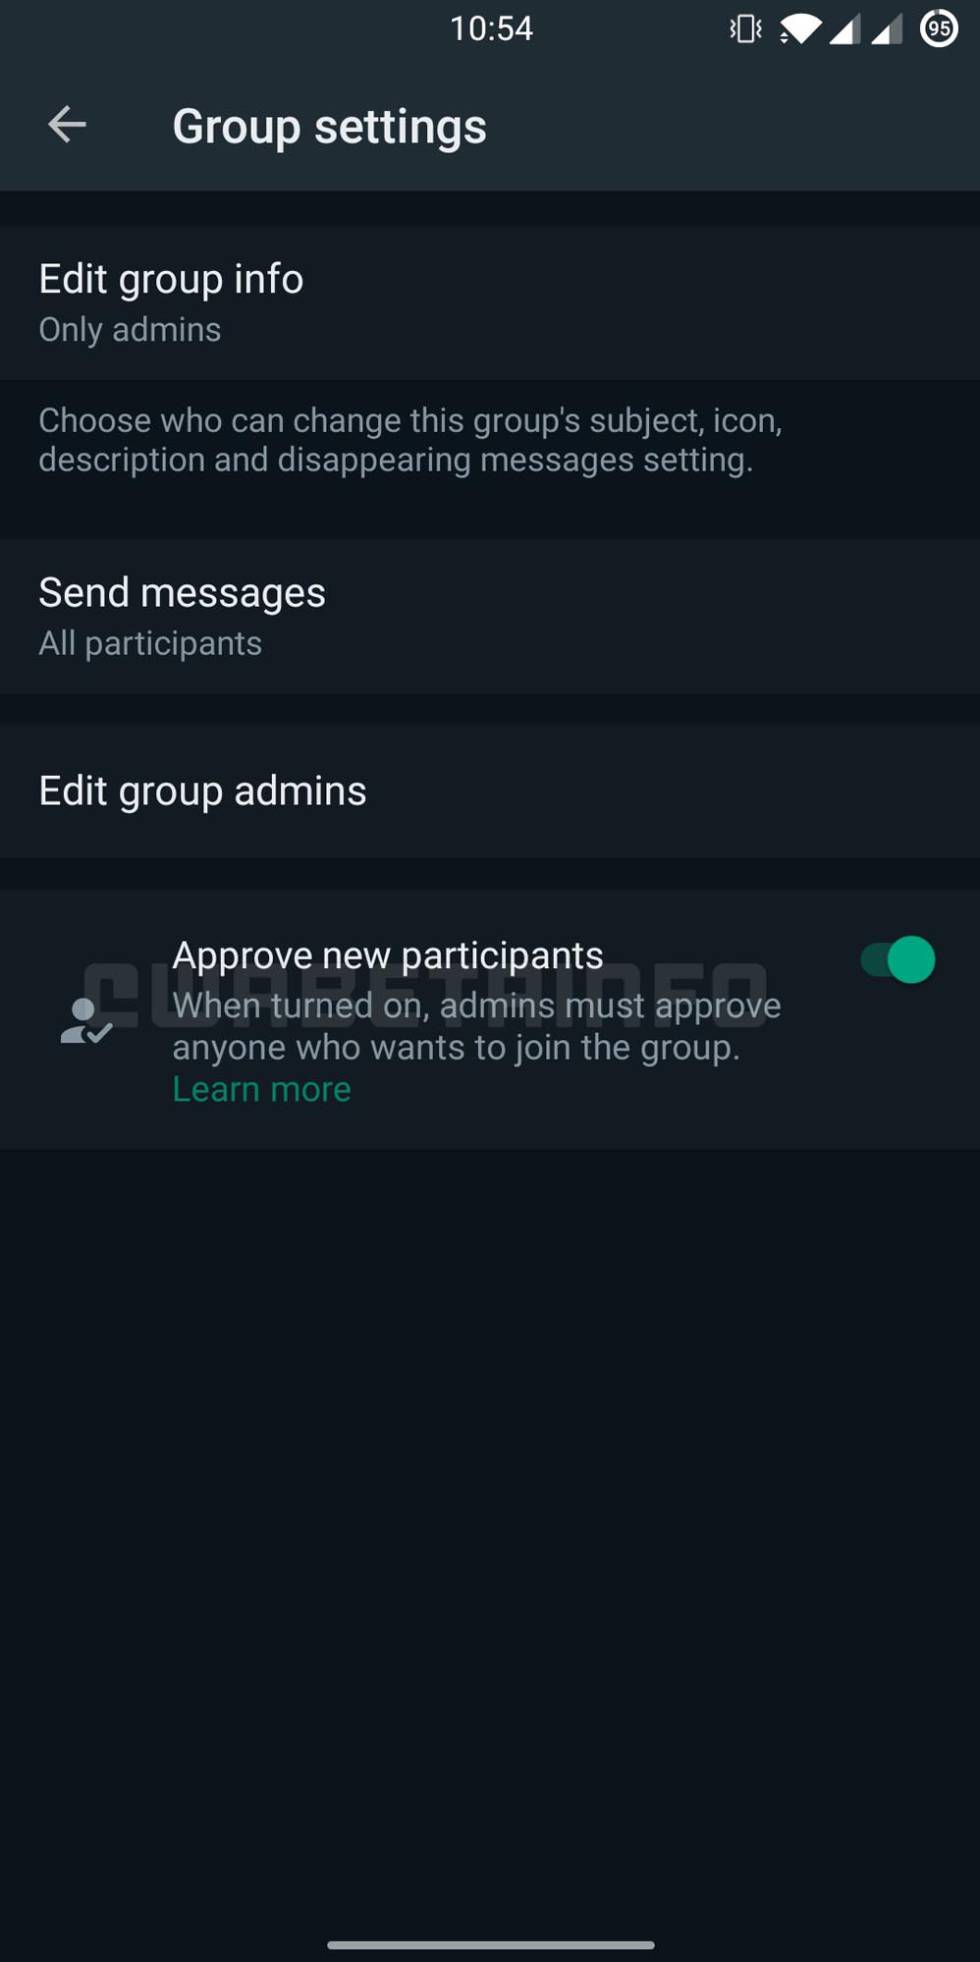 Approve new participants in WhatsApp groups